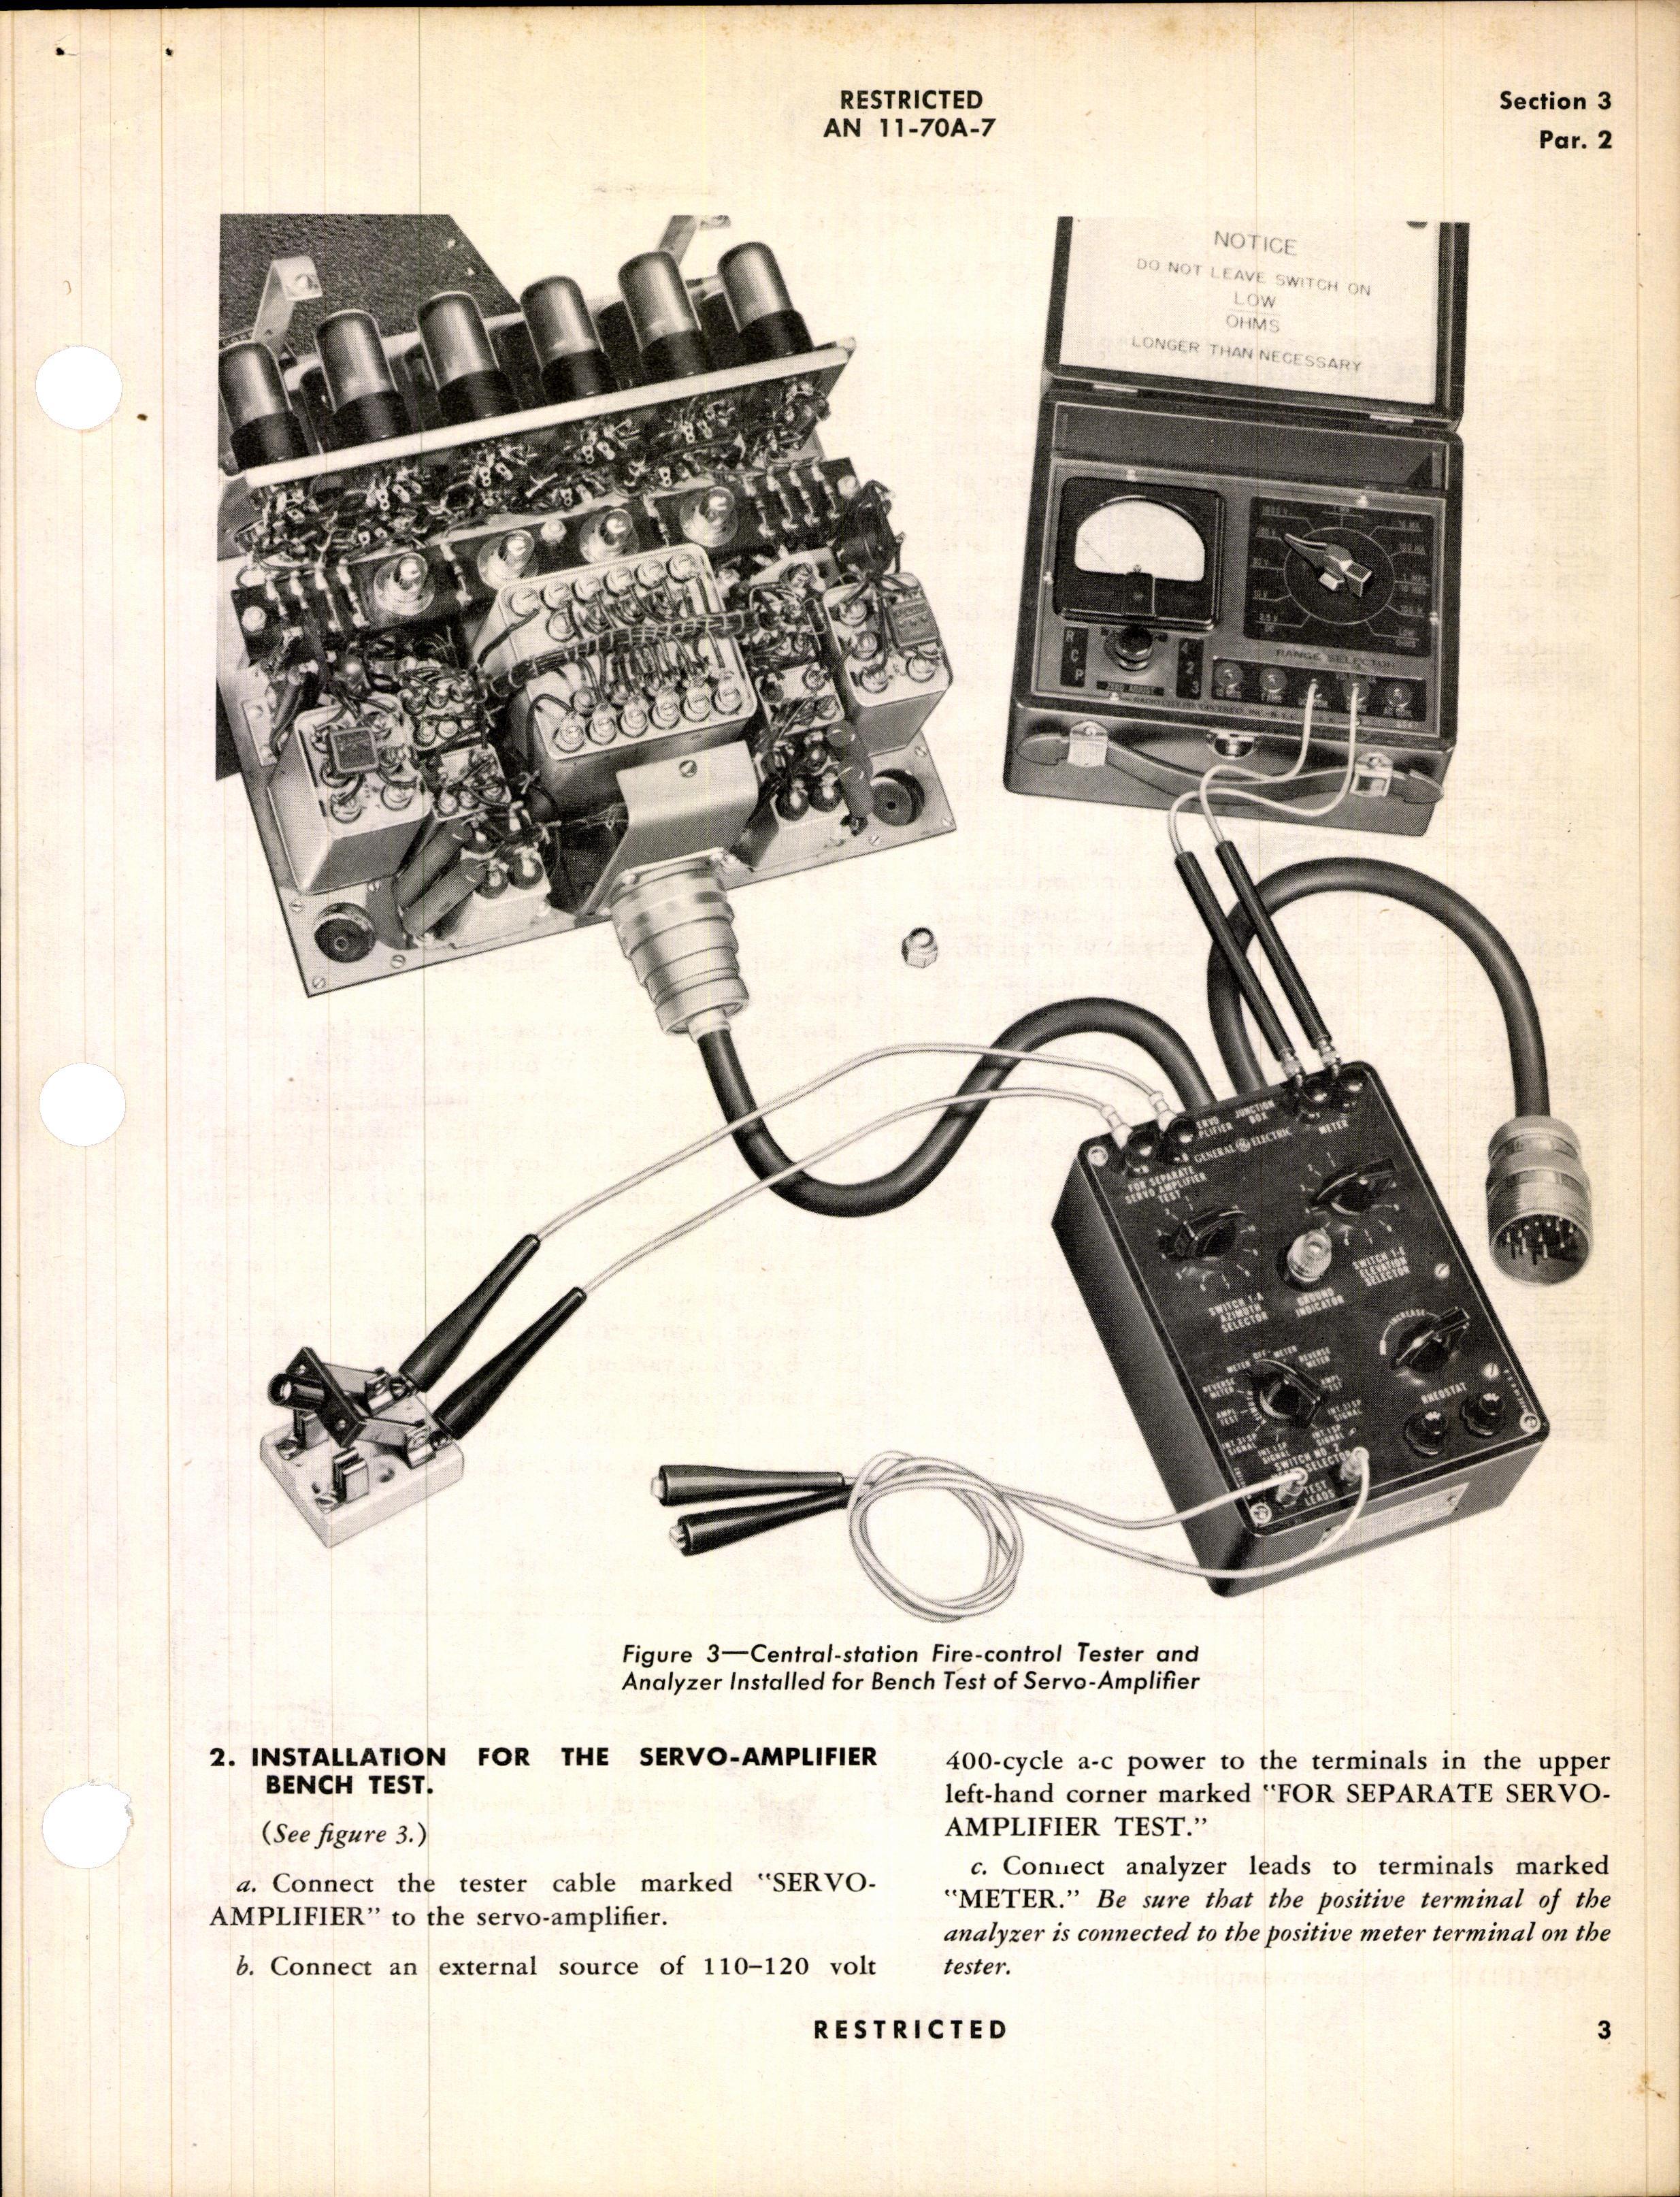 Sample page 7 from AirCorps Library document: Operation & Service Instructions for Central-Station Fire-Control Tester